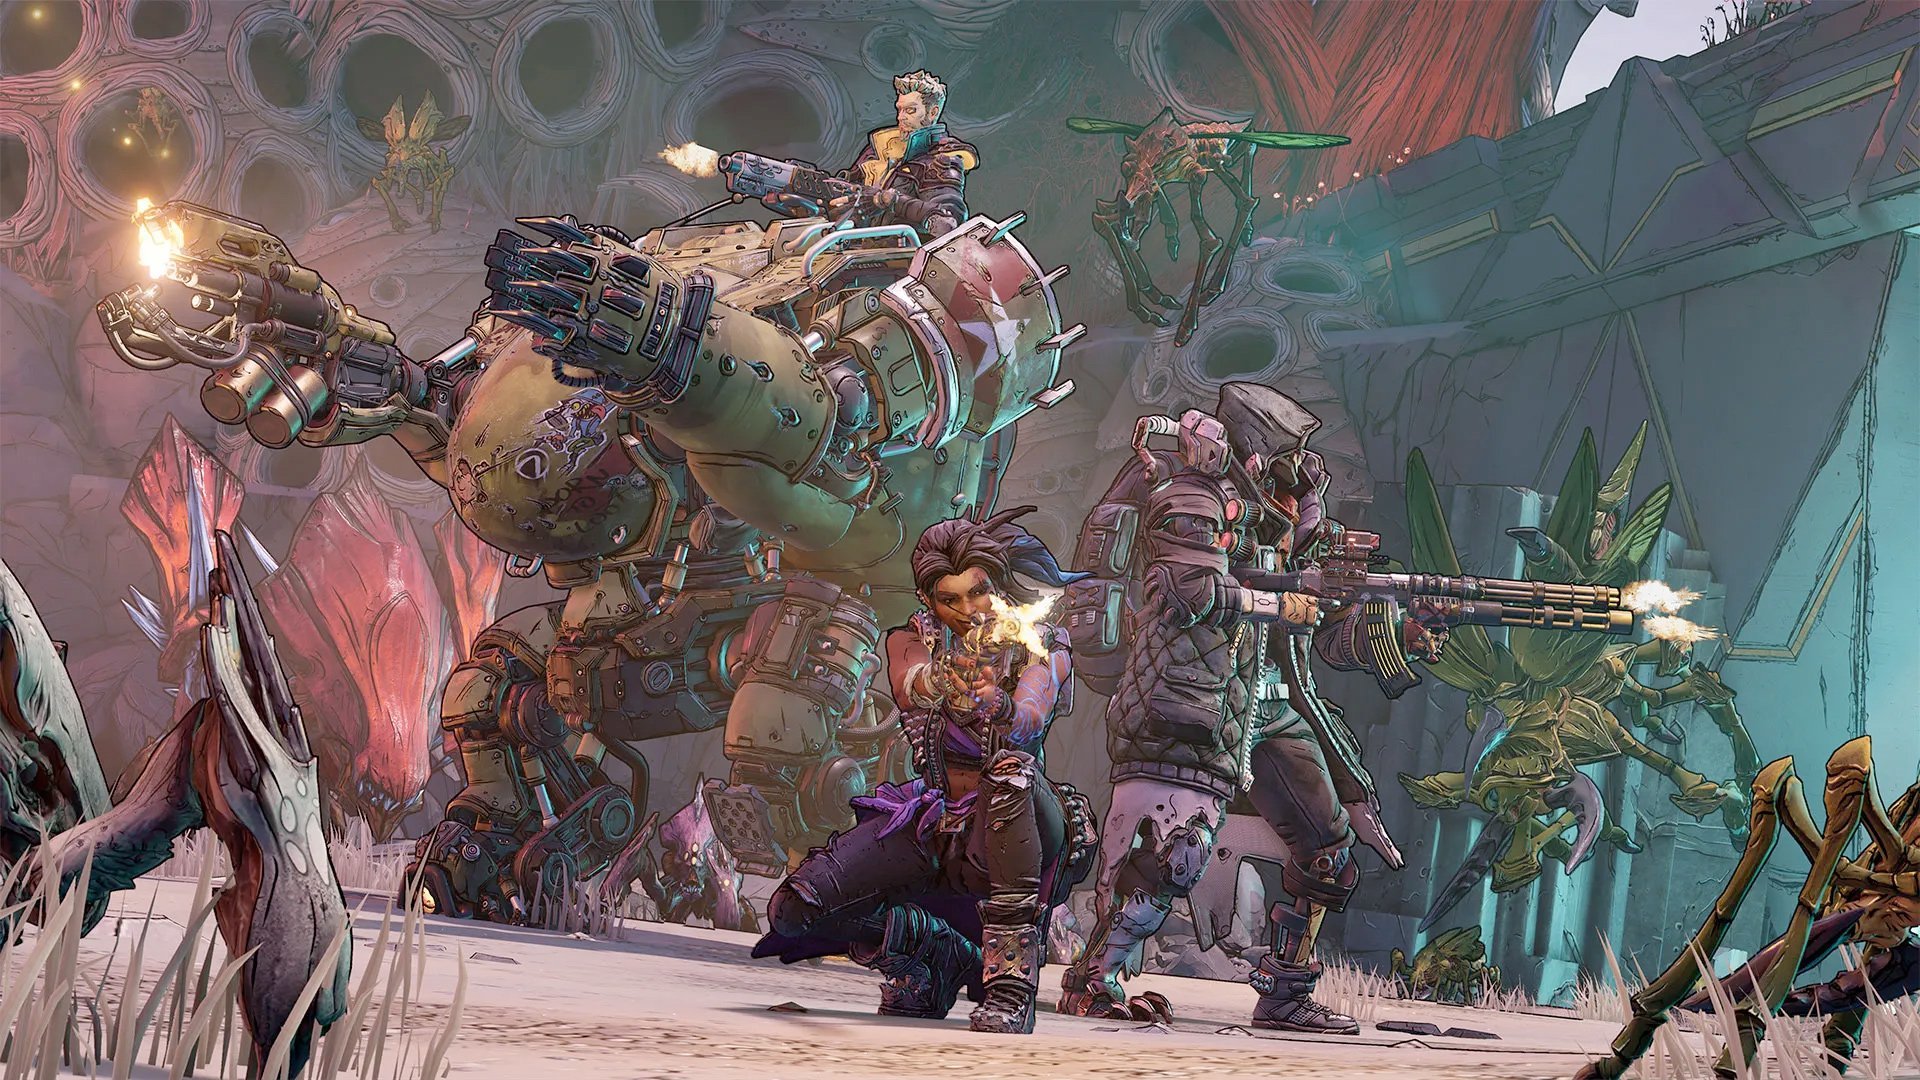 Borderlands 3 was 2K's fastest-selling title and broke PC records for the publisher